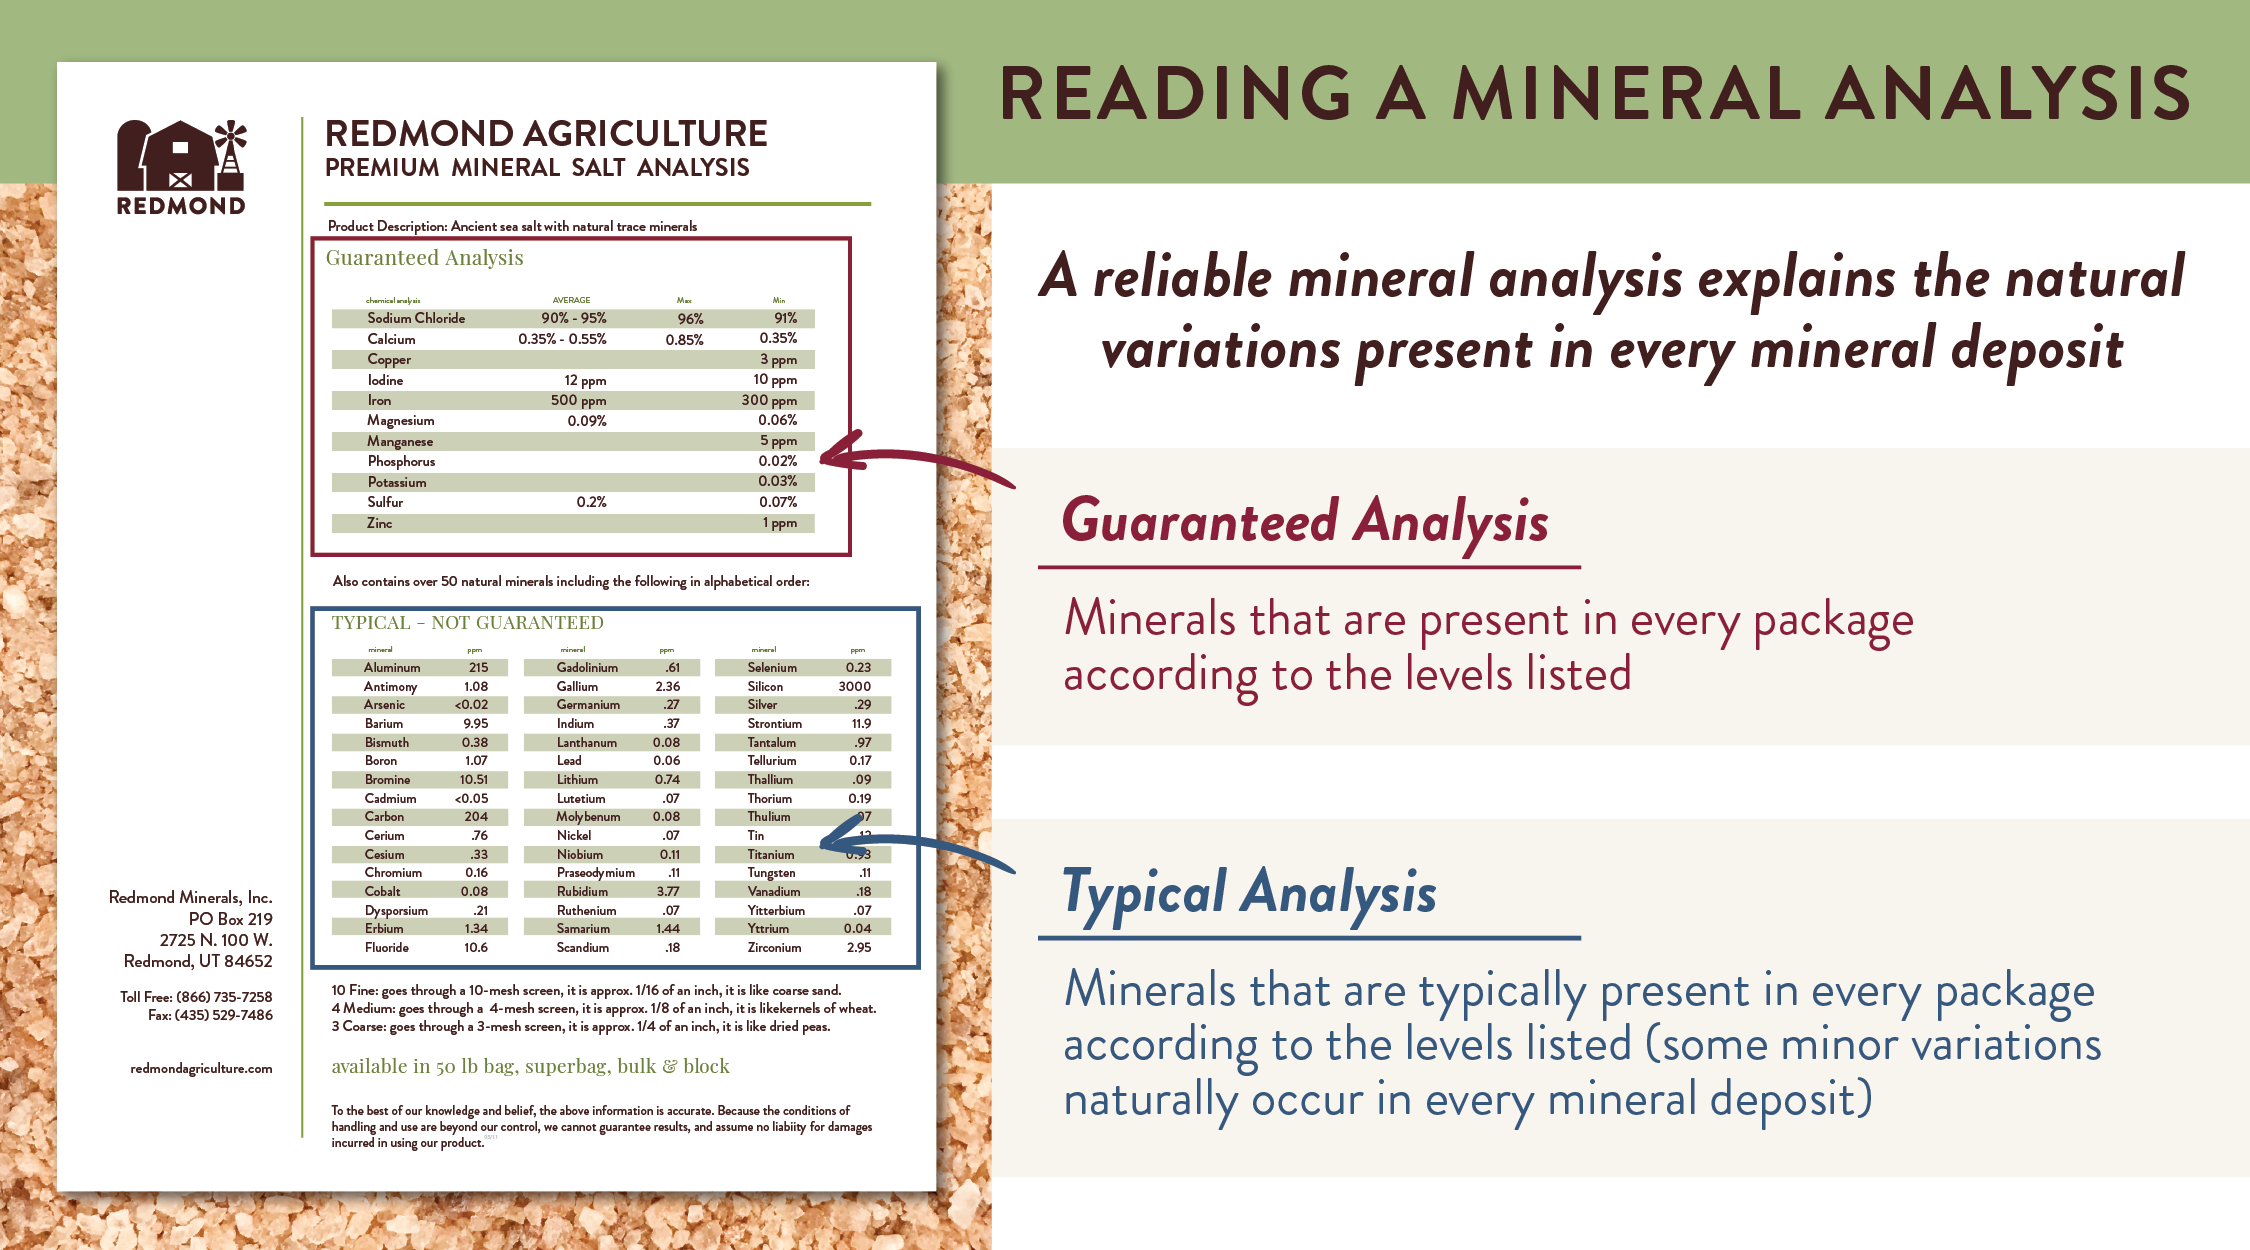 How to Read a Mineral Analysis